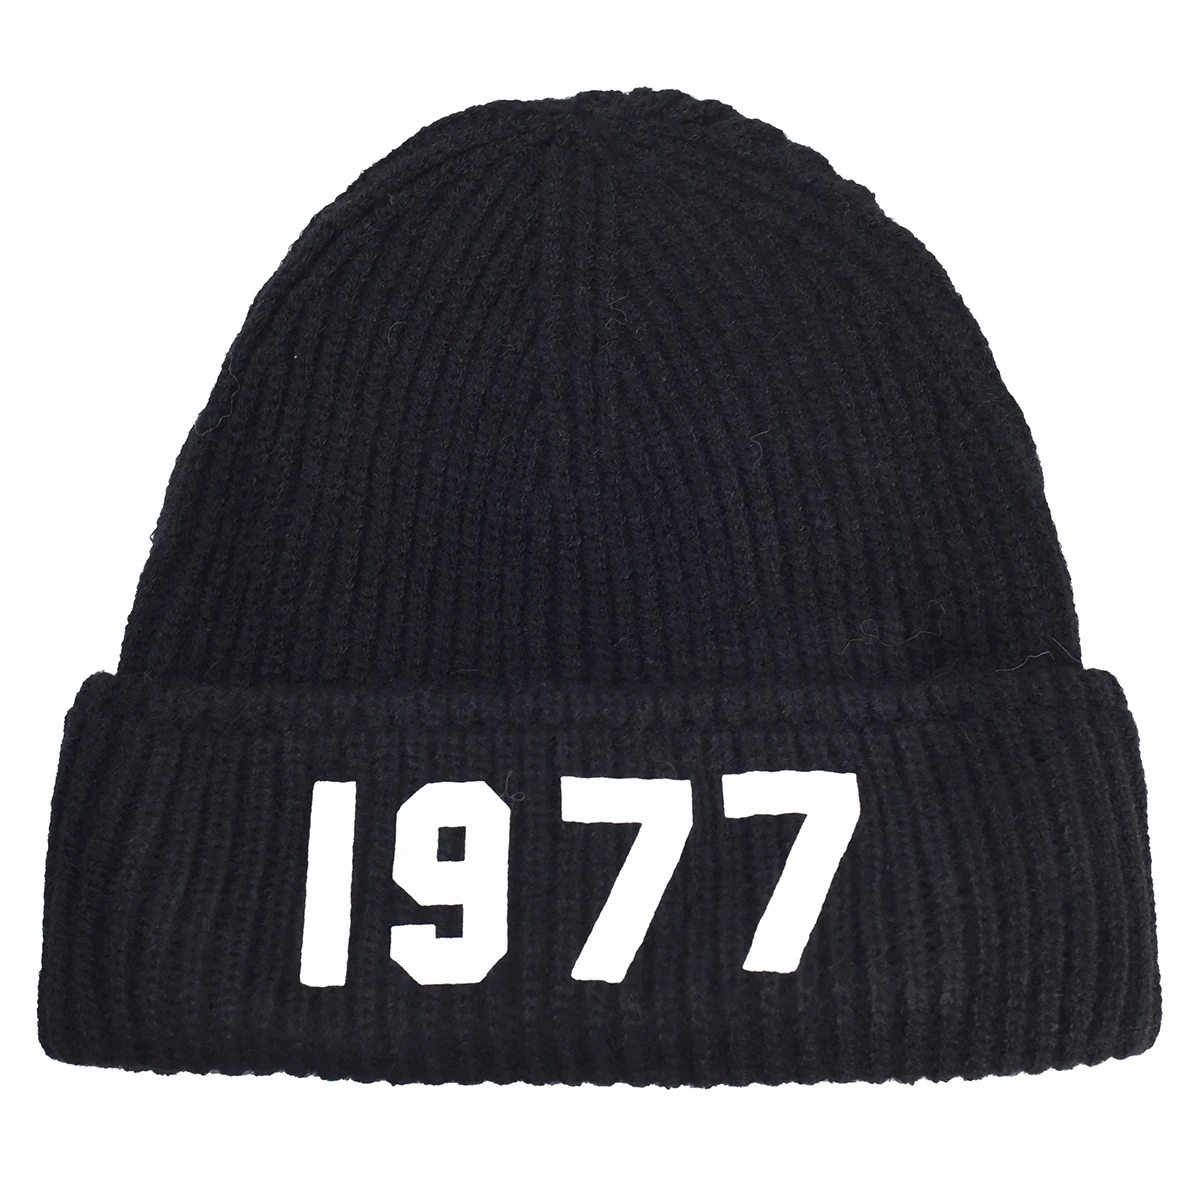 

Winter Hats for Woman New Beanies Knitted 1977 Letter Cute Hat Girls Autumn Female Beanie Caps Warmer Bonnet Ladies Casual Cap